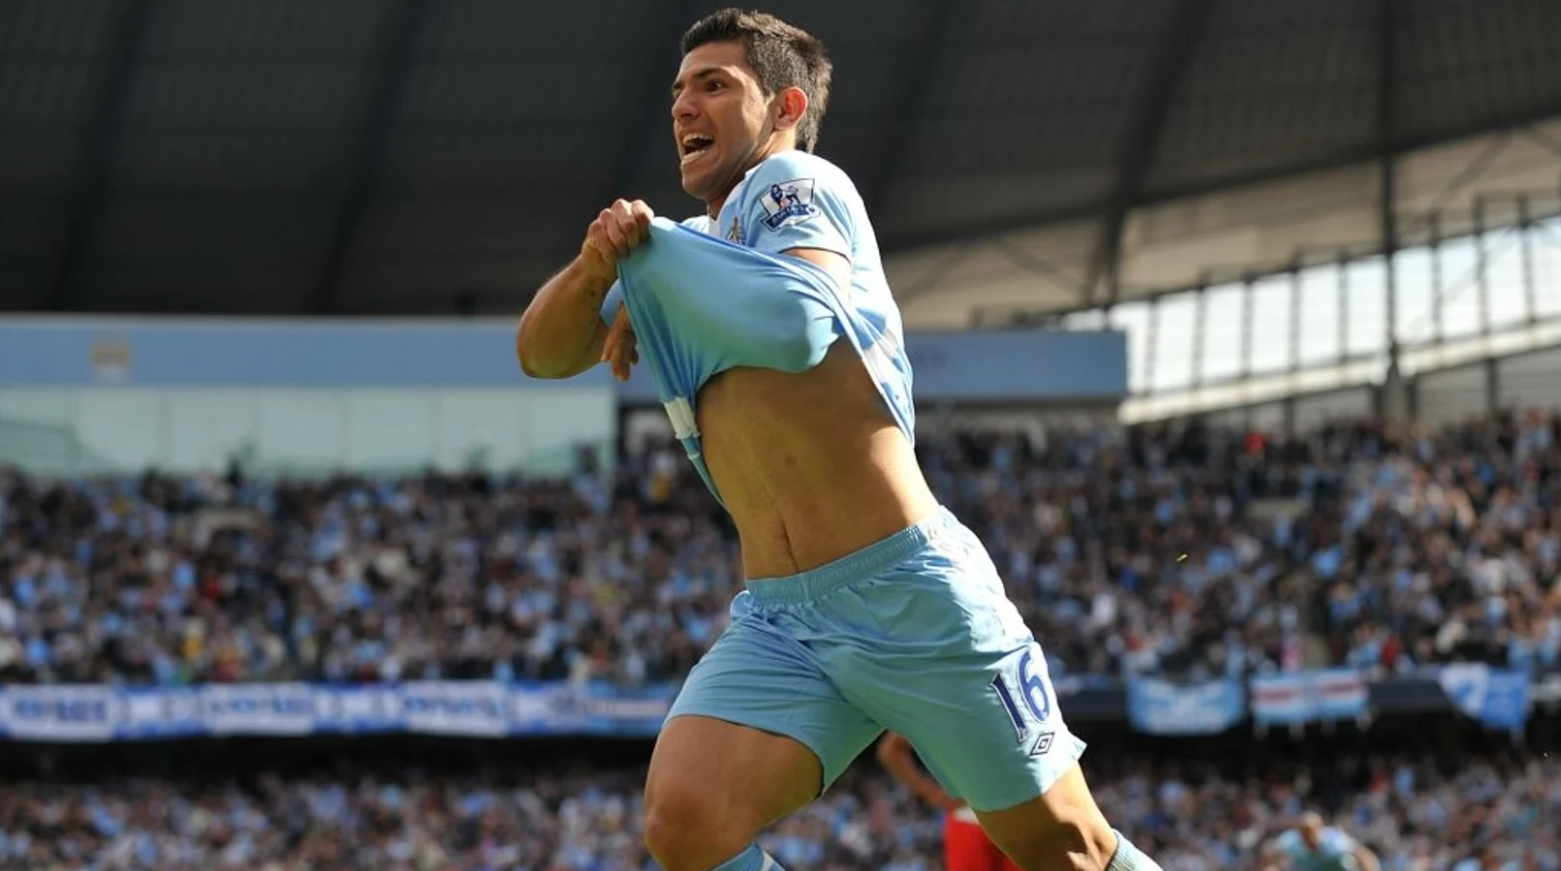 Sergio Aguero scores after scoring at 93:20 against QPR to hand City their first ever PL title in the 2011/12 season. (Premier League website)